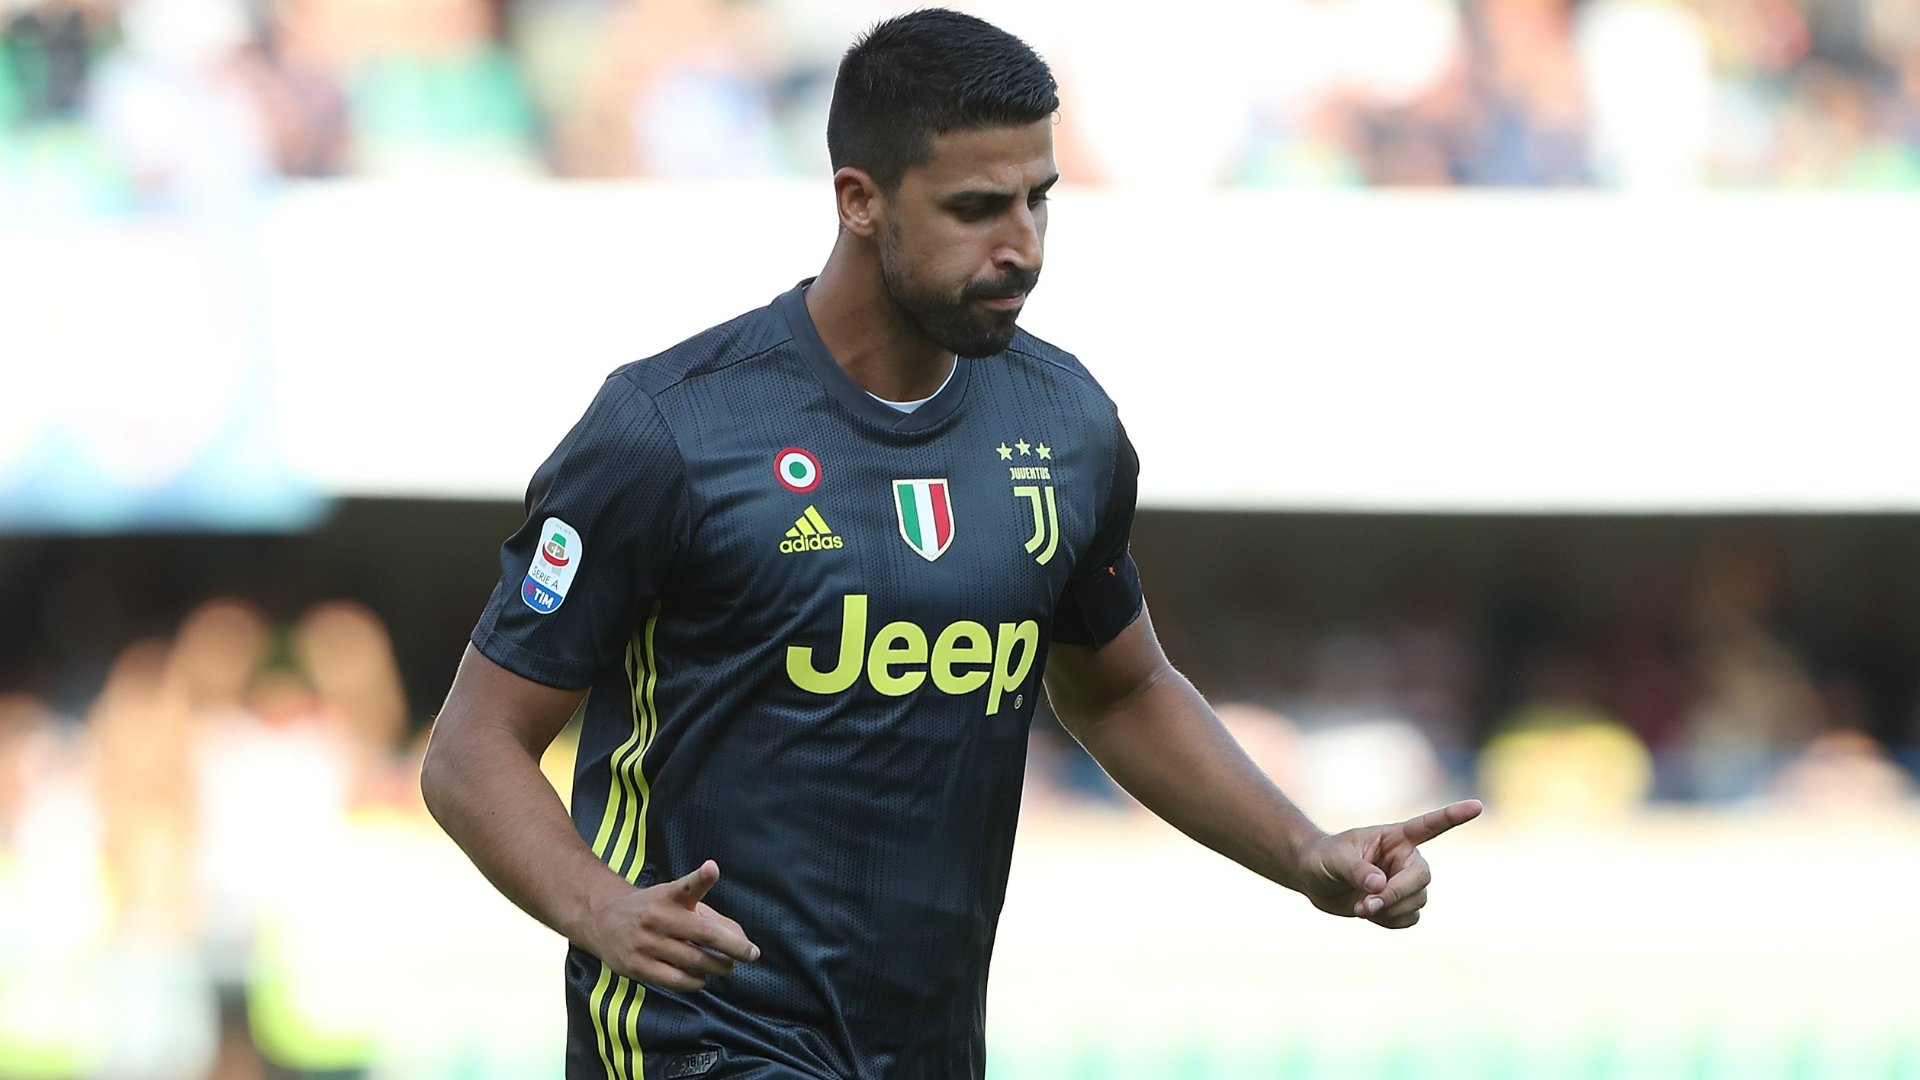 Juventus last won the Champions League in 1996, but Sami Khedira believes they can end that drought.